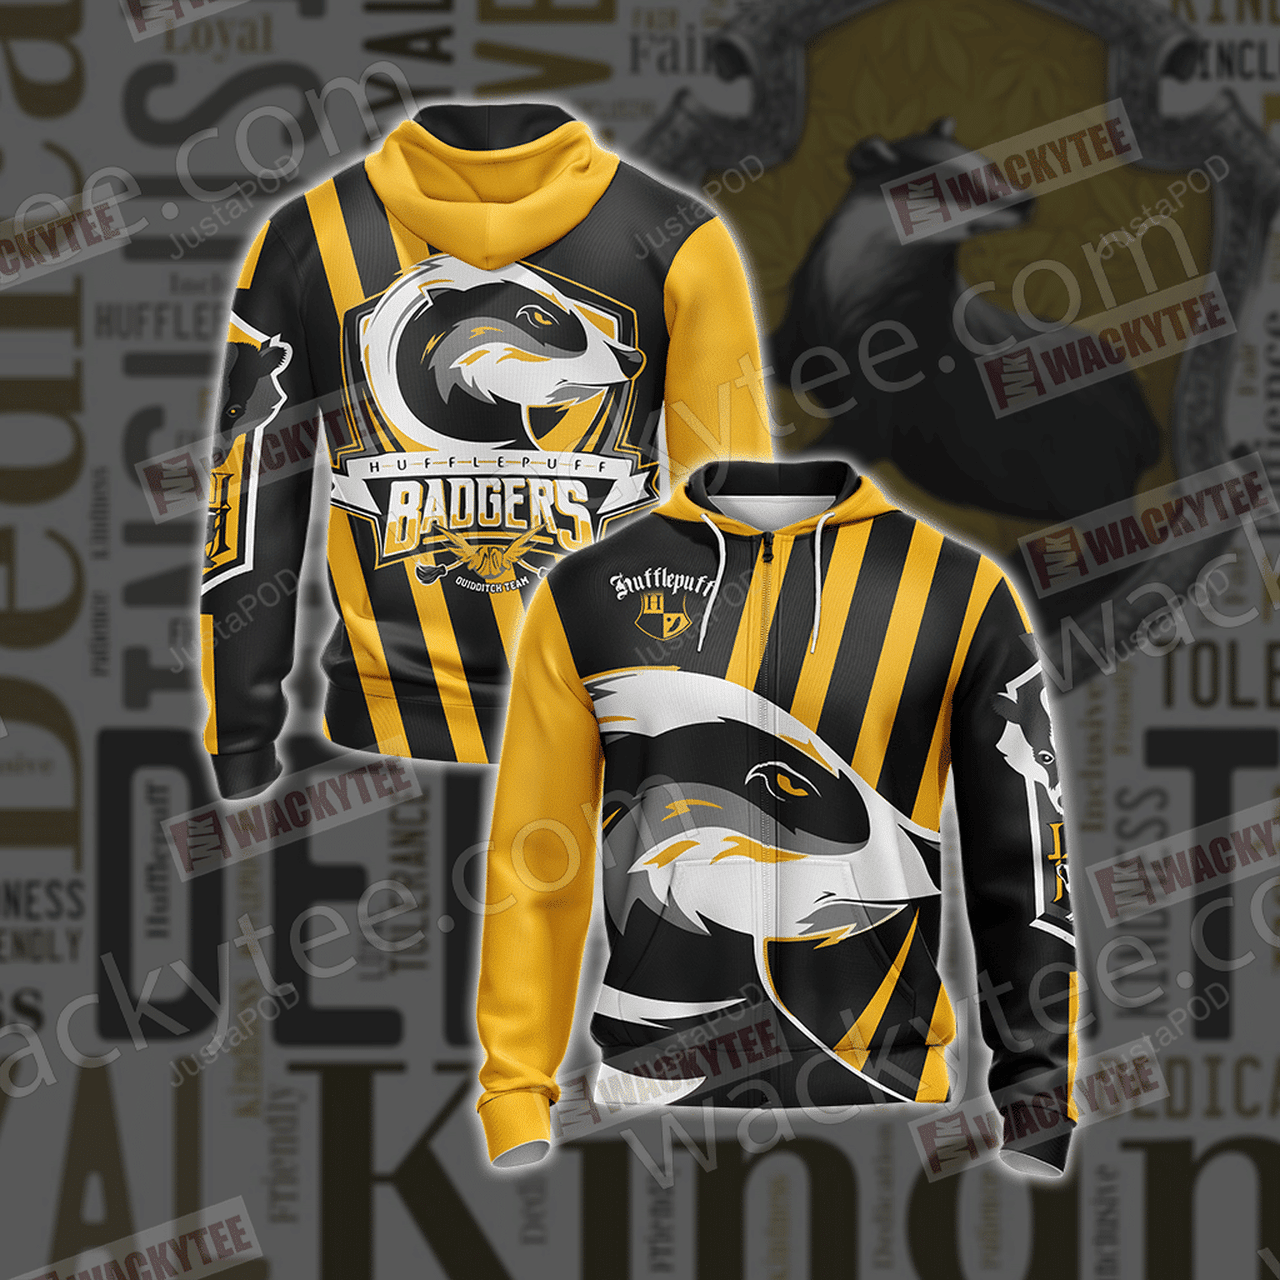 Hufflepuff Badgers Quidditch Team Harry Potter 3d All Over Printed Hoodie